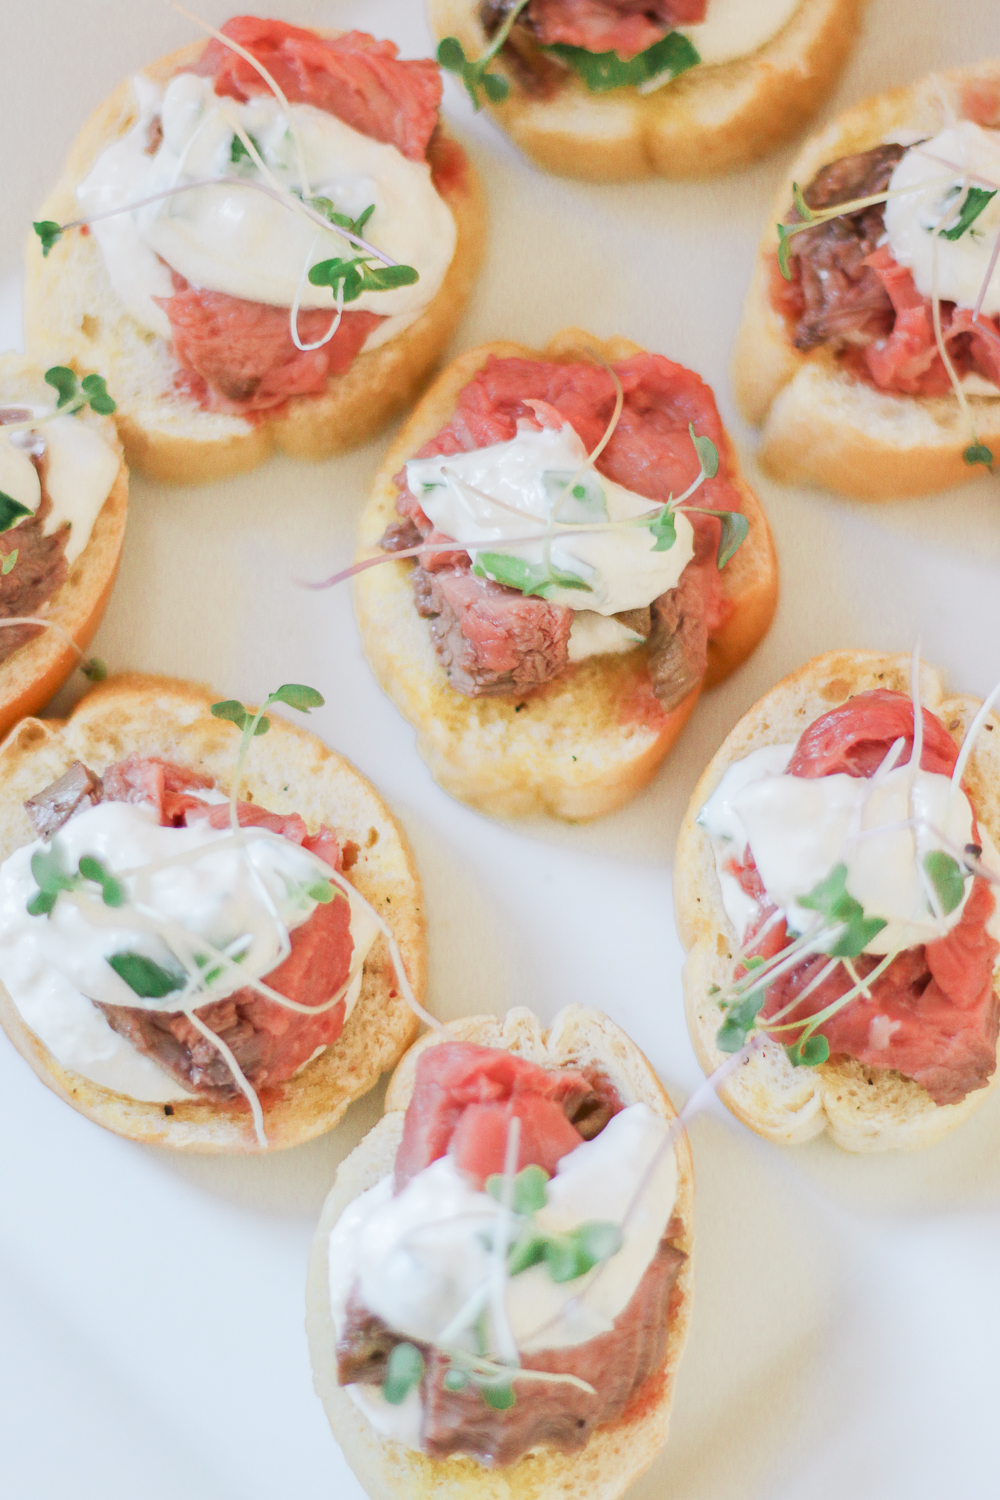 My Go-to Cocktail Appetizer: Easy Beef Tenderloin Crostinis